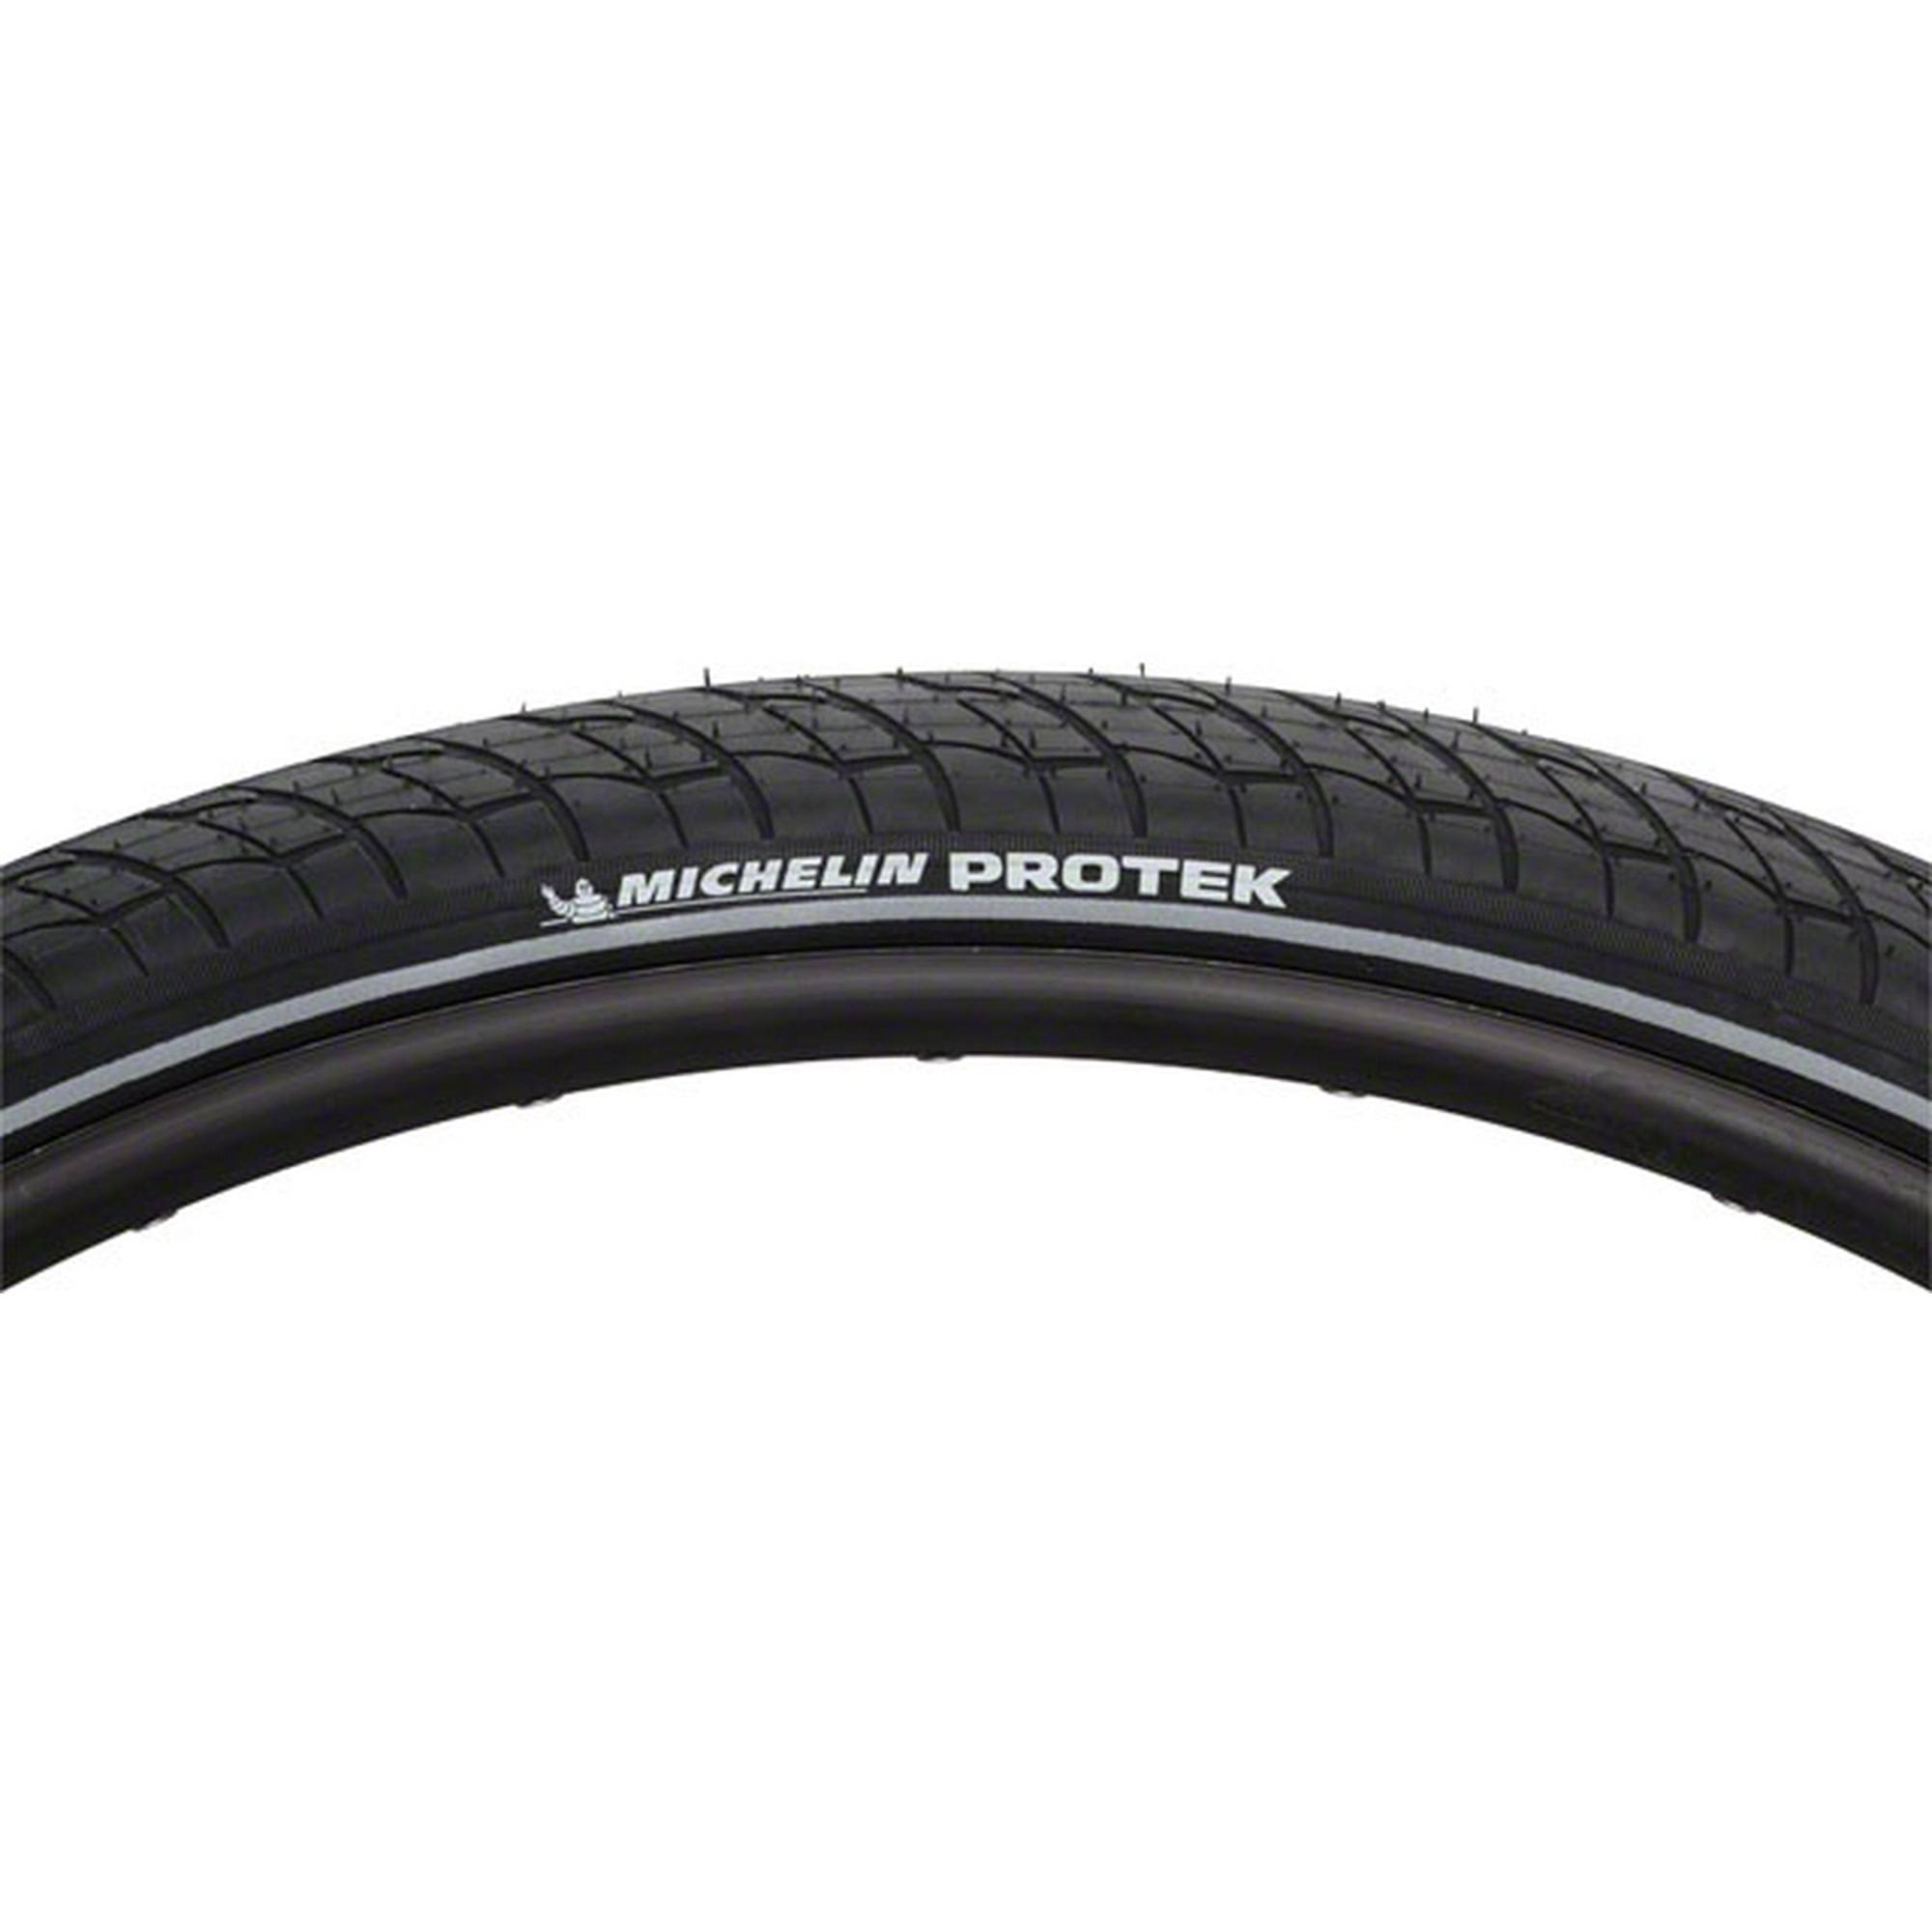 Michelin Protek Bicycle Tire